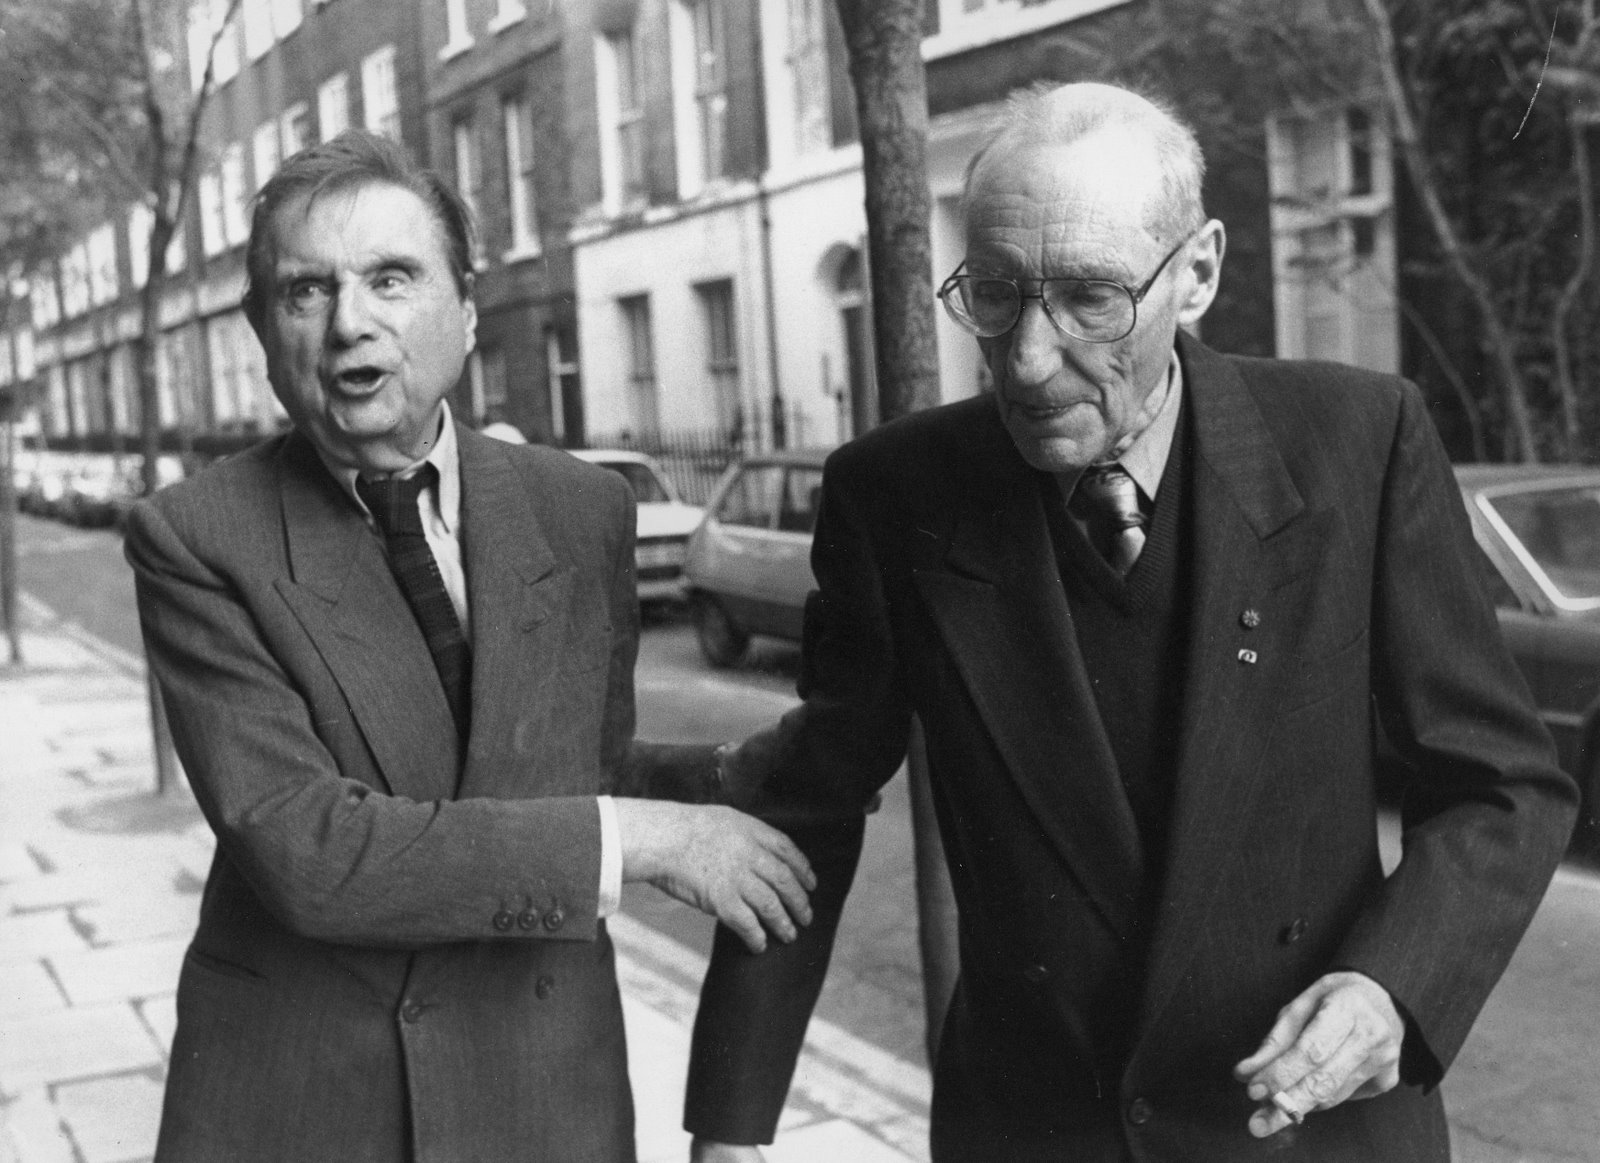 [Francis+Bacon+and+William+Burroughs,+London+1989+(2).jpg]